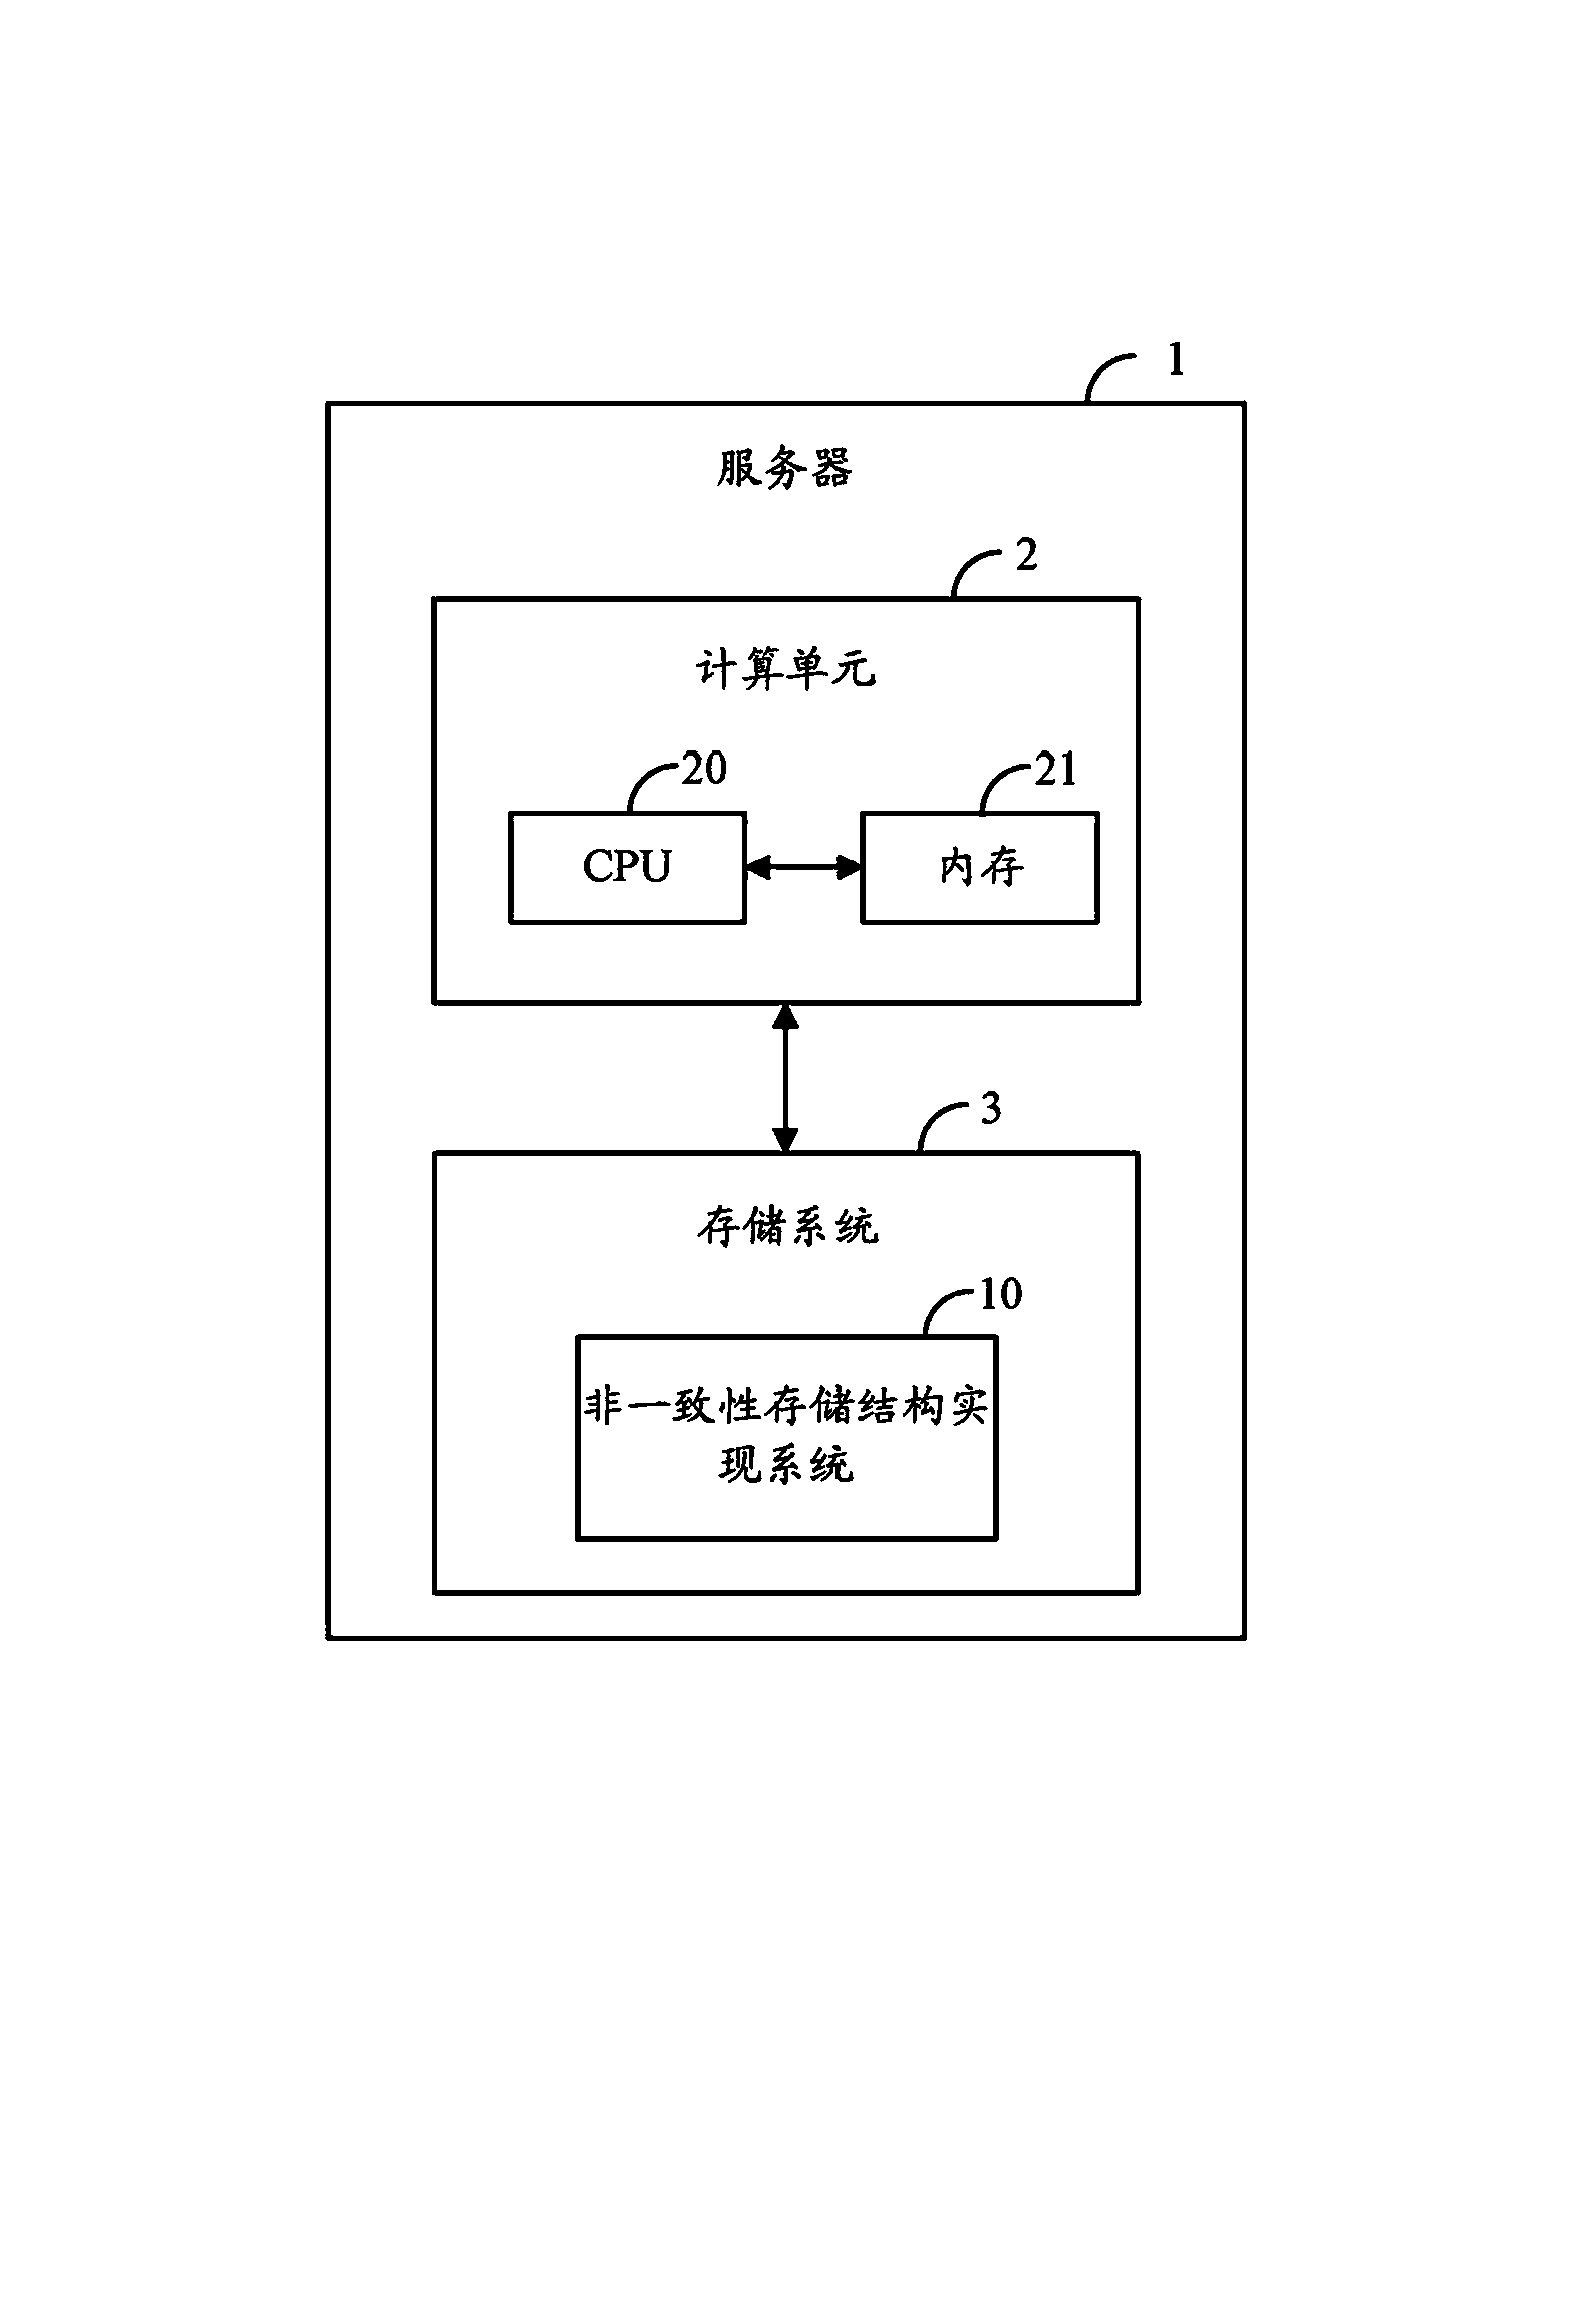 Implementation method and system for non-consistent storage structure